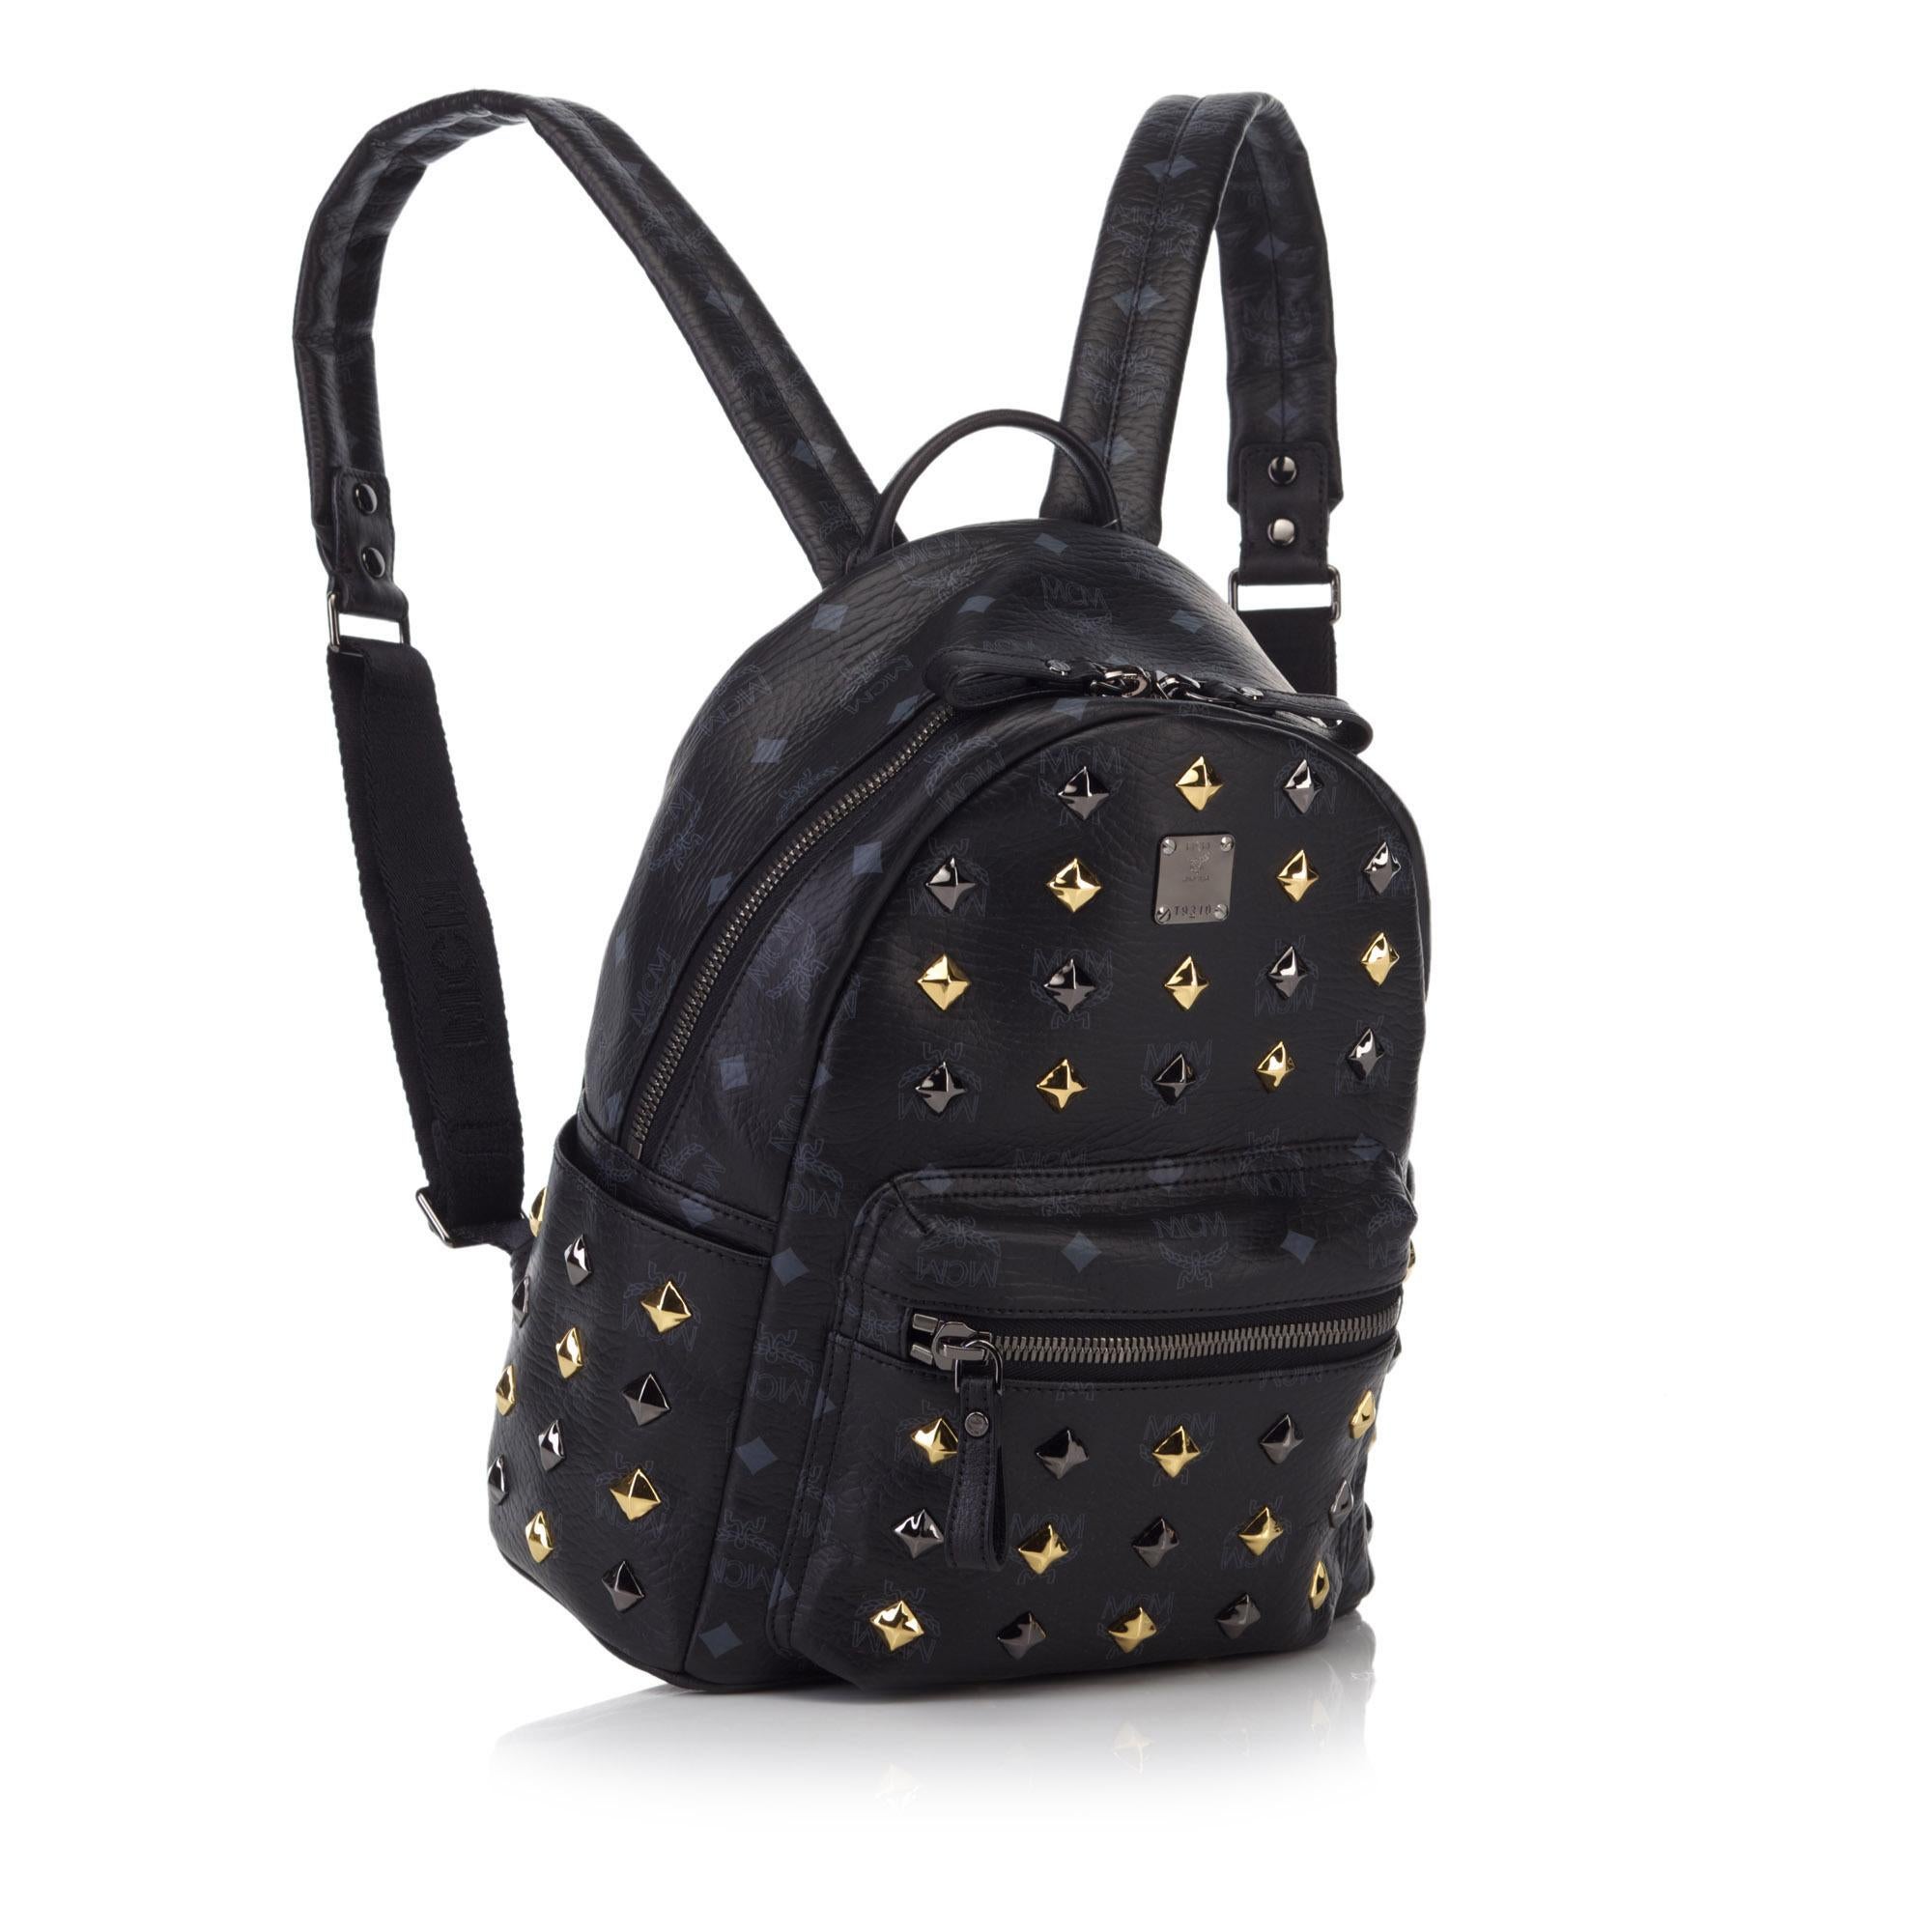 The Stark backpack features a studded leather body, flat straps, exterior slip and zip pockets, a top zip closure, and interior zip, slip, and open pockets. It carries as AB condition rating.

Inclusions: 
Dust Bag
Dimensions:
Length: 25.50